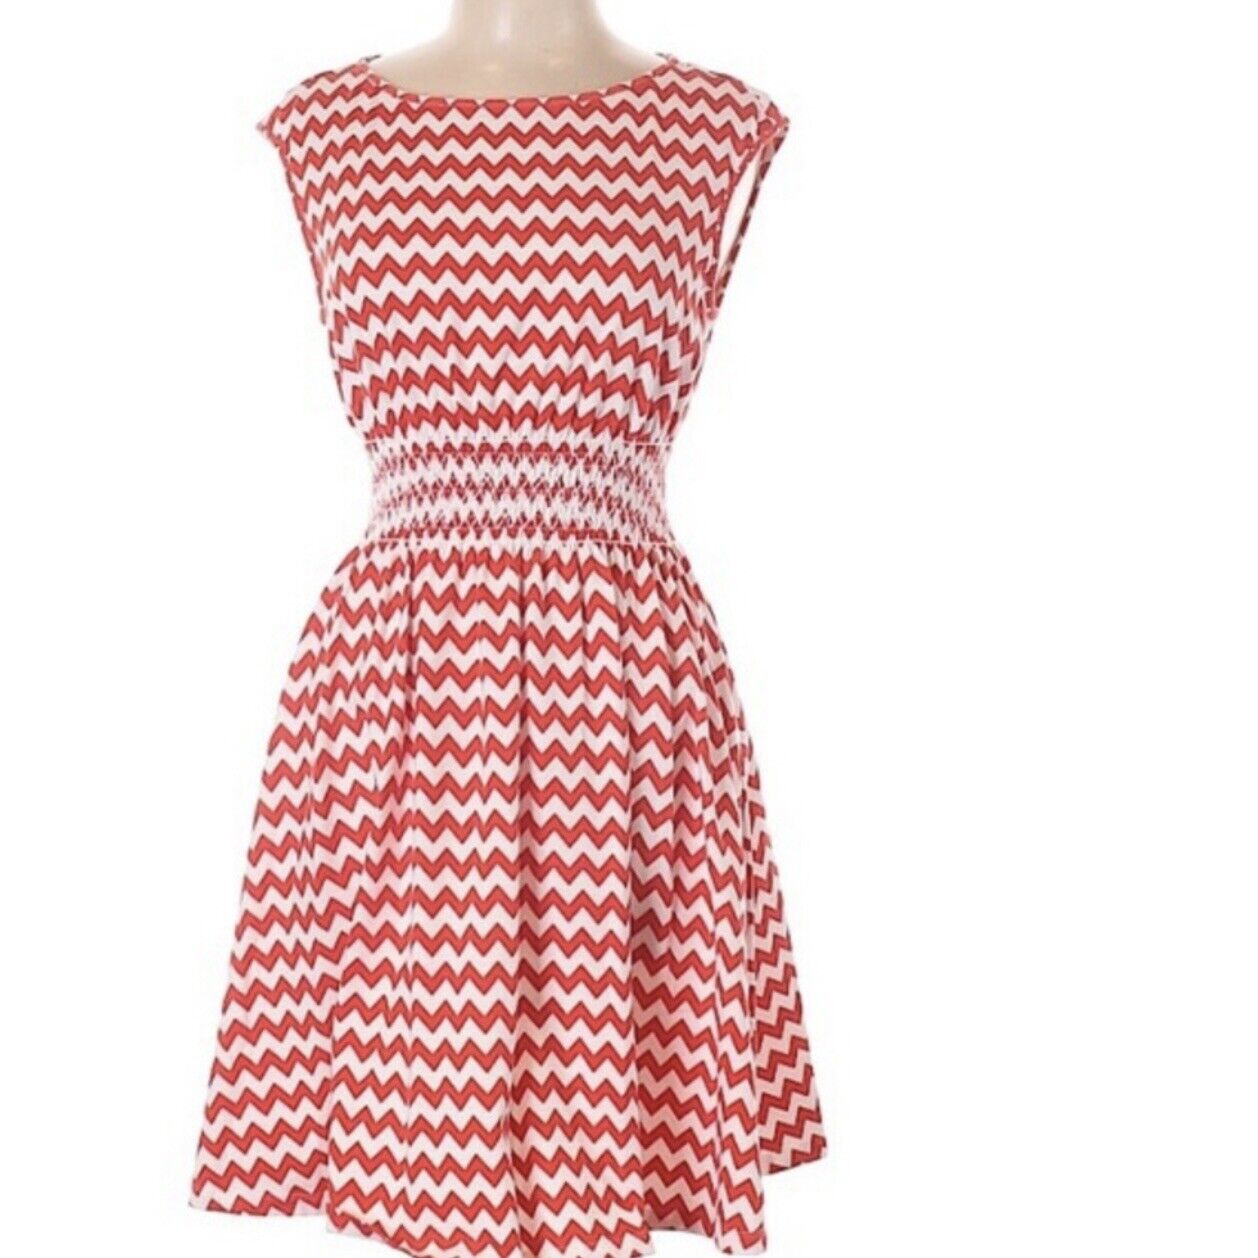 Kate New Free Shipping Spade Dress Womens Sale Special Price Red Size Chevron Medium